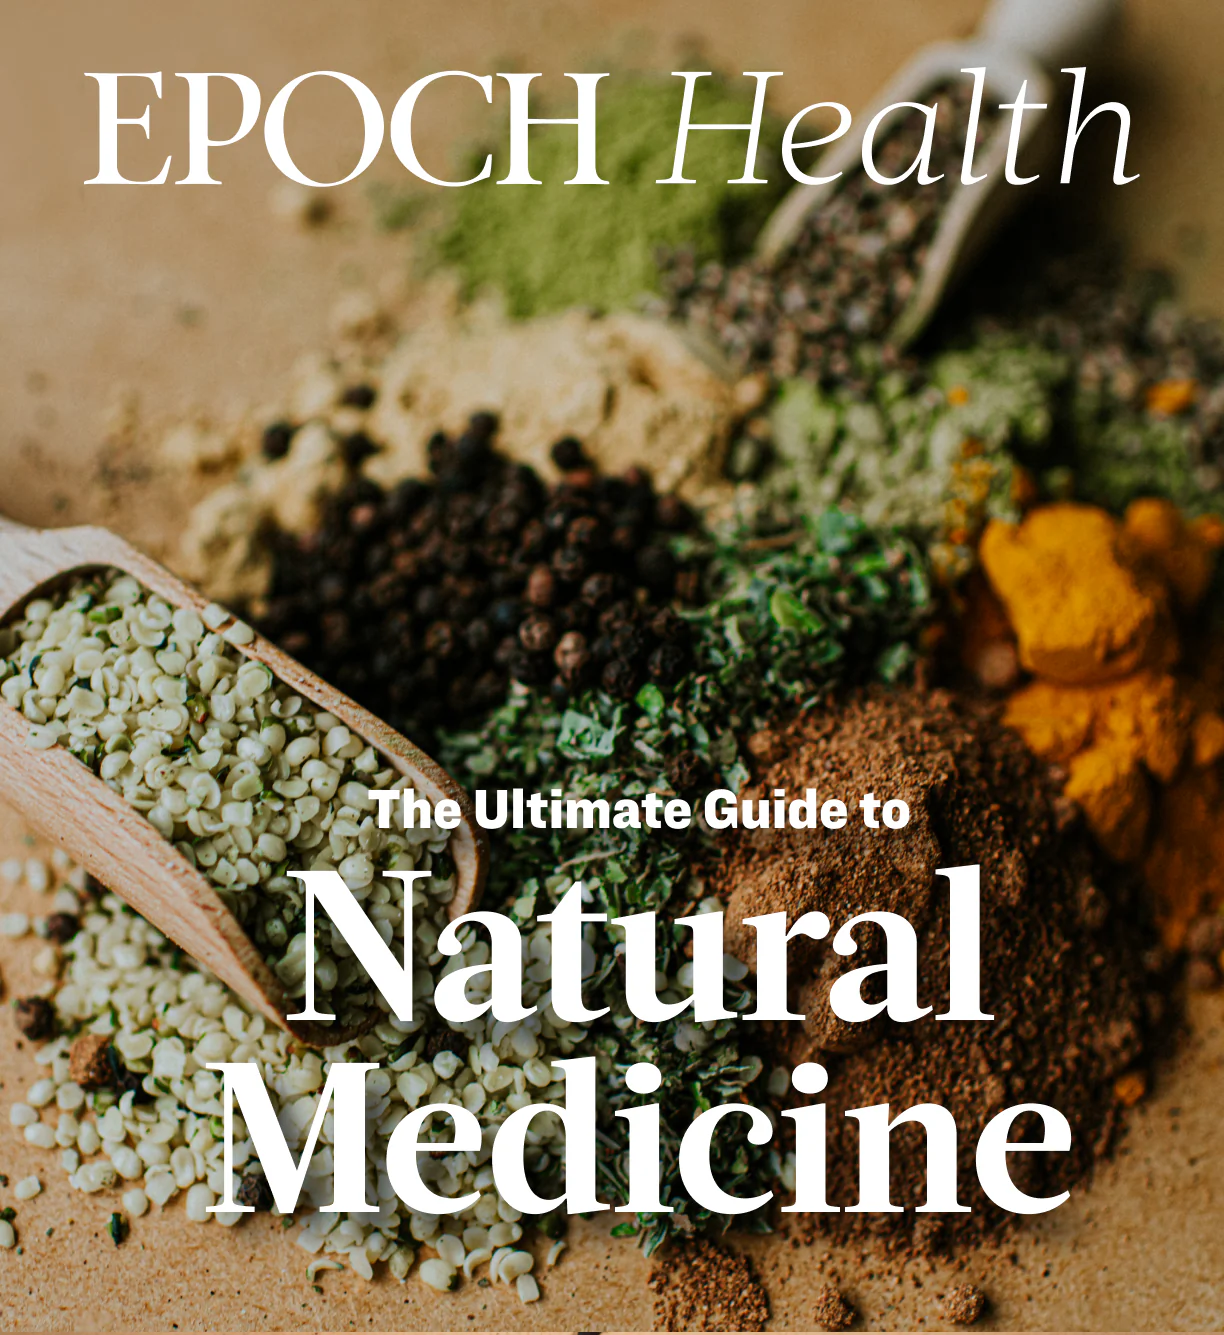 The Ultimate Guide to Natural Medicine